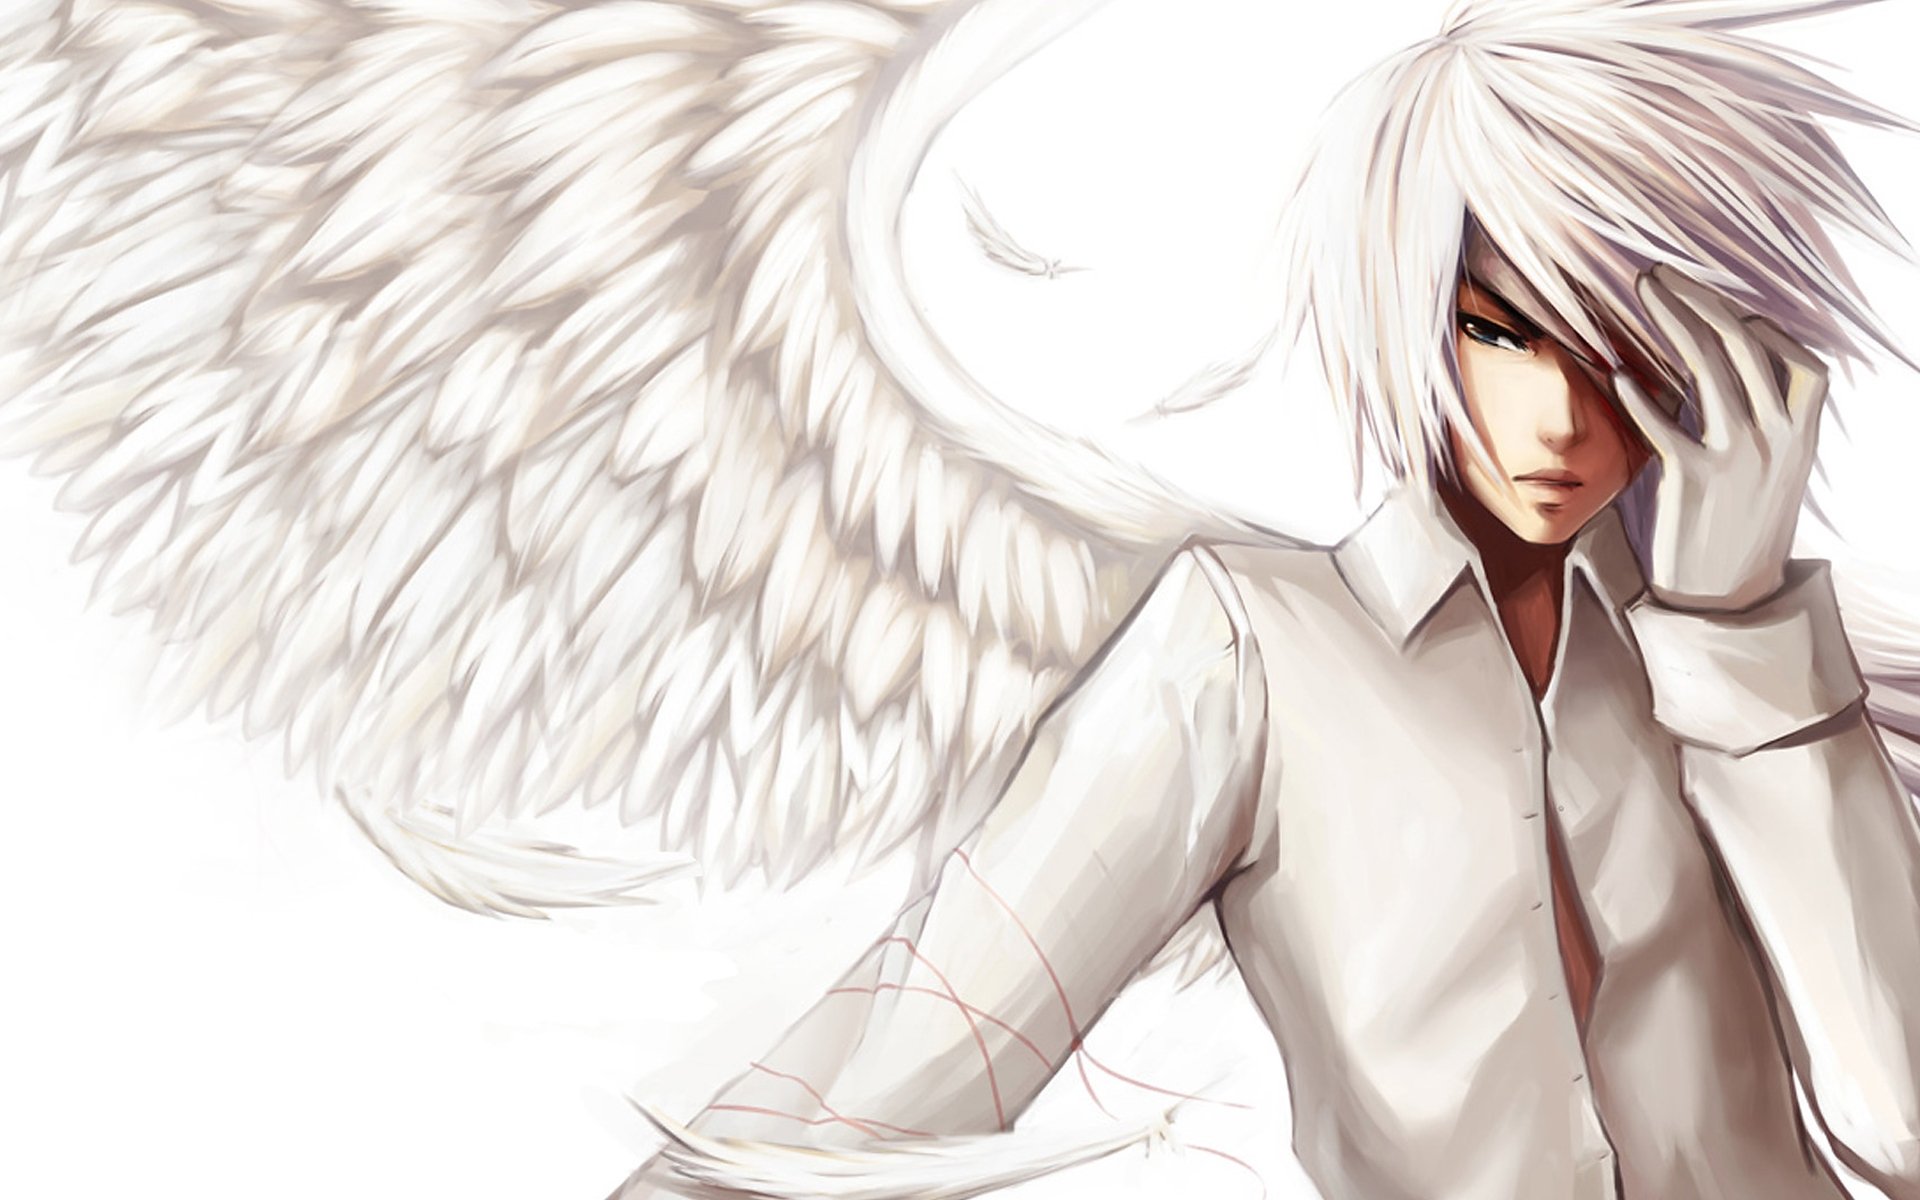 Anime Boy Demon Hd Wallpapers - Anime Boys With White Hair And Wings -  1920x1200 Wallpaper 